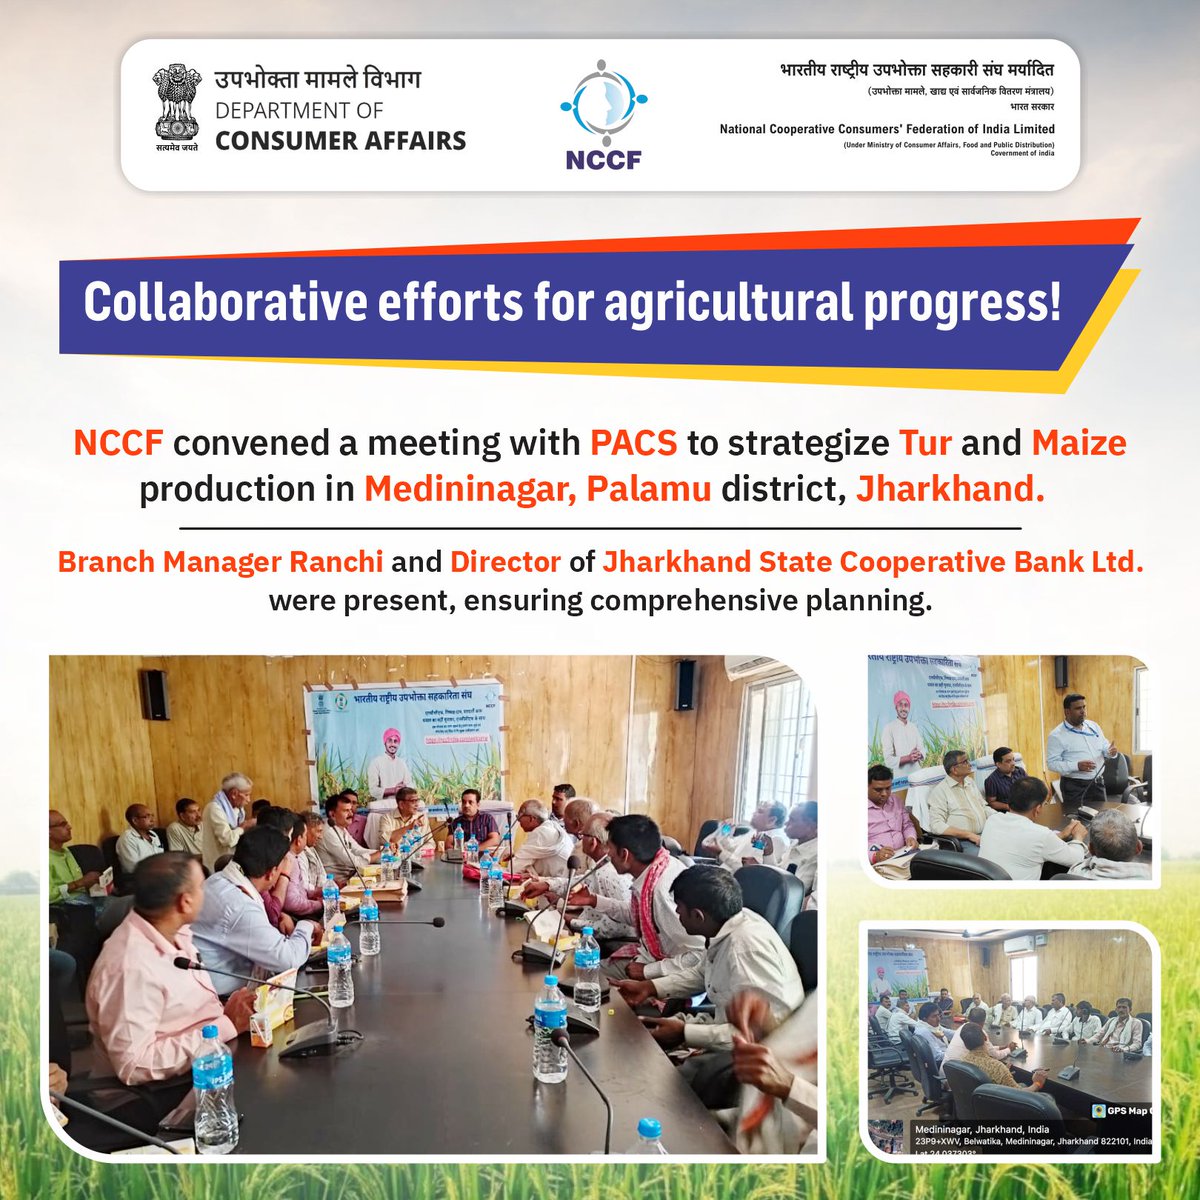 Progress in motion! NCCF, in collaboration with PACS, conducted a meeting to discuss Tur and Maize production in Palamu, Jharkhand. #procurement #Agriculture #Tur #Maize #Jharkhand #nccf